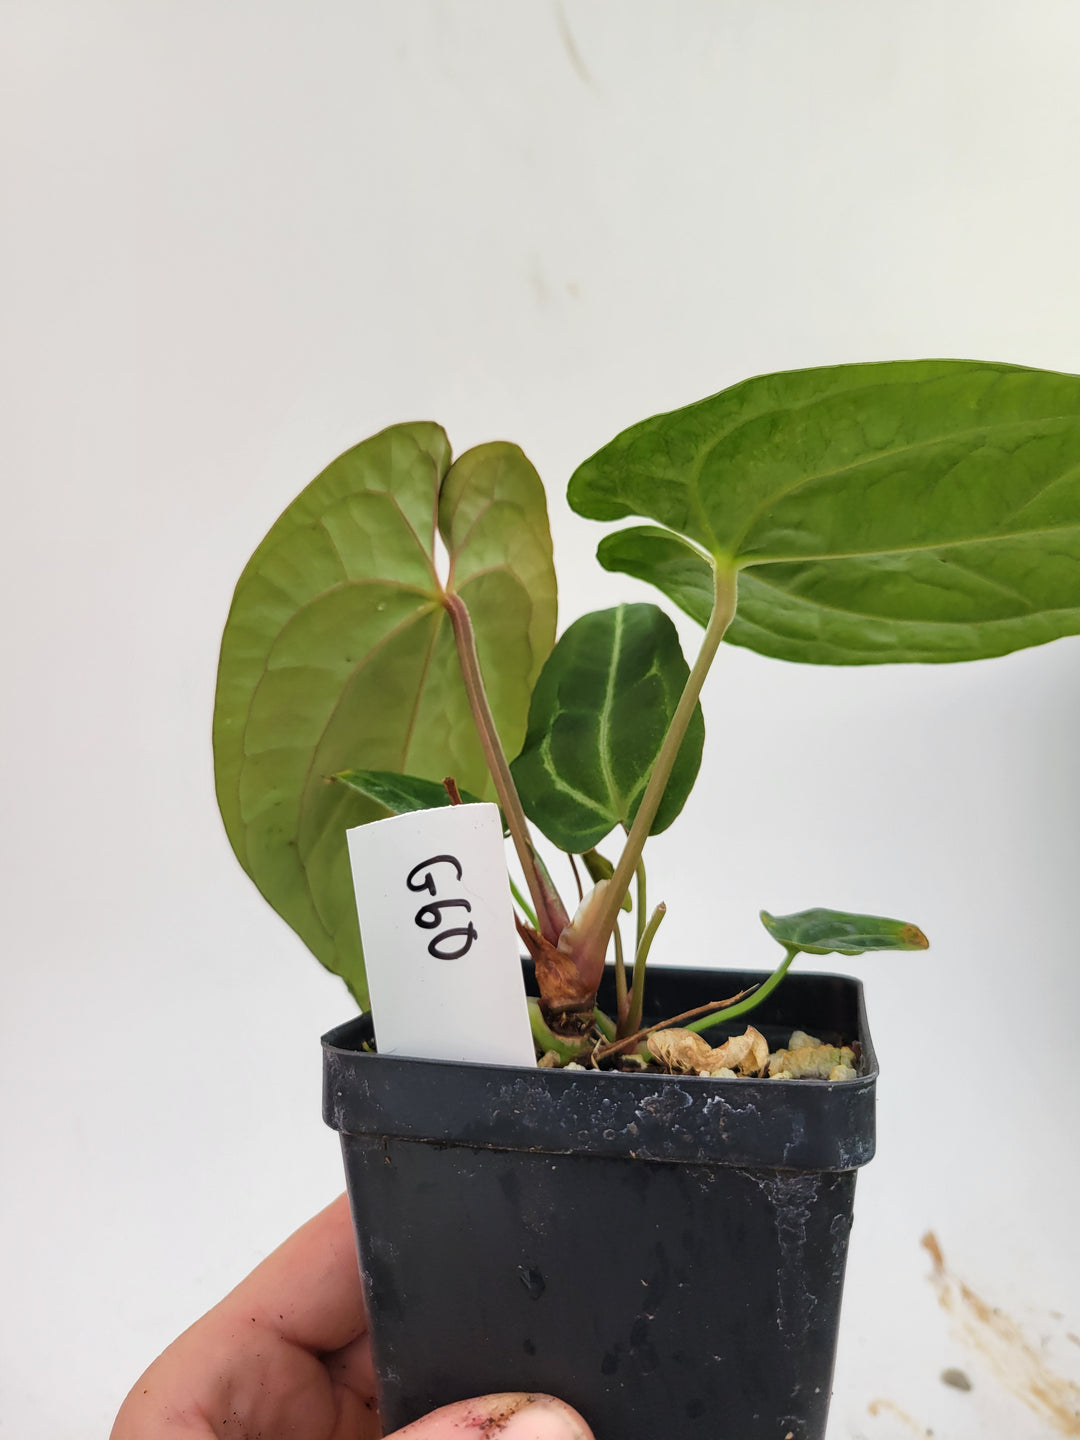 Anthurium Hoffmannii X  A. Luxurians , 2 Plants in pot! New Hybrid by NPGP, exact plant pictured,  seed Grown. US seller, #G60 - Nice Plants Good Pots